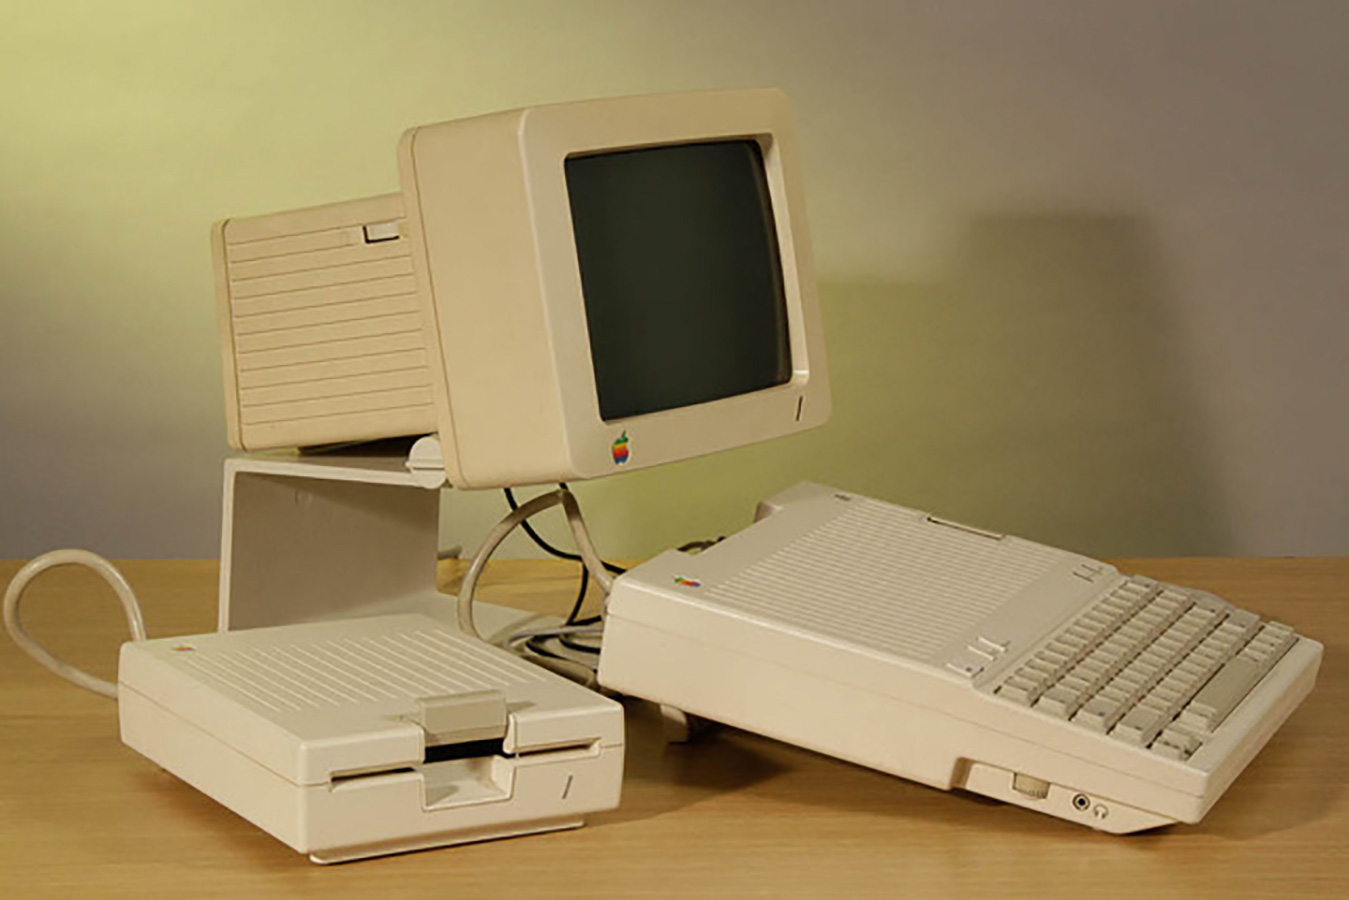 This photograph depicts an Apple IIc computer positioned on top of a wood laminate desk. The computer components (keyboard, display, and disk drive) are all light beige, and a logo with a rainbow-colored apple is prominent below the computer screen.